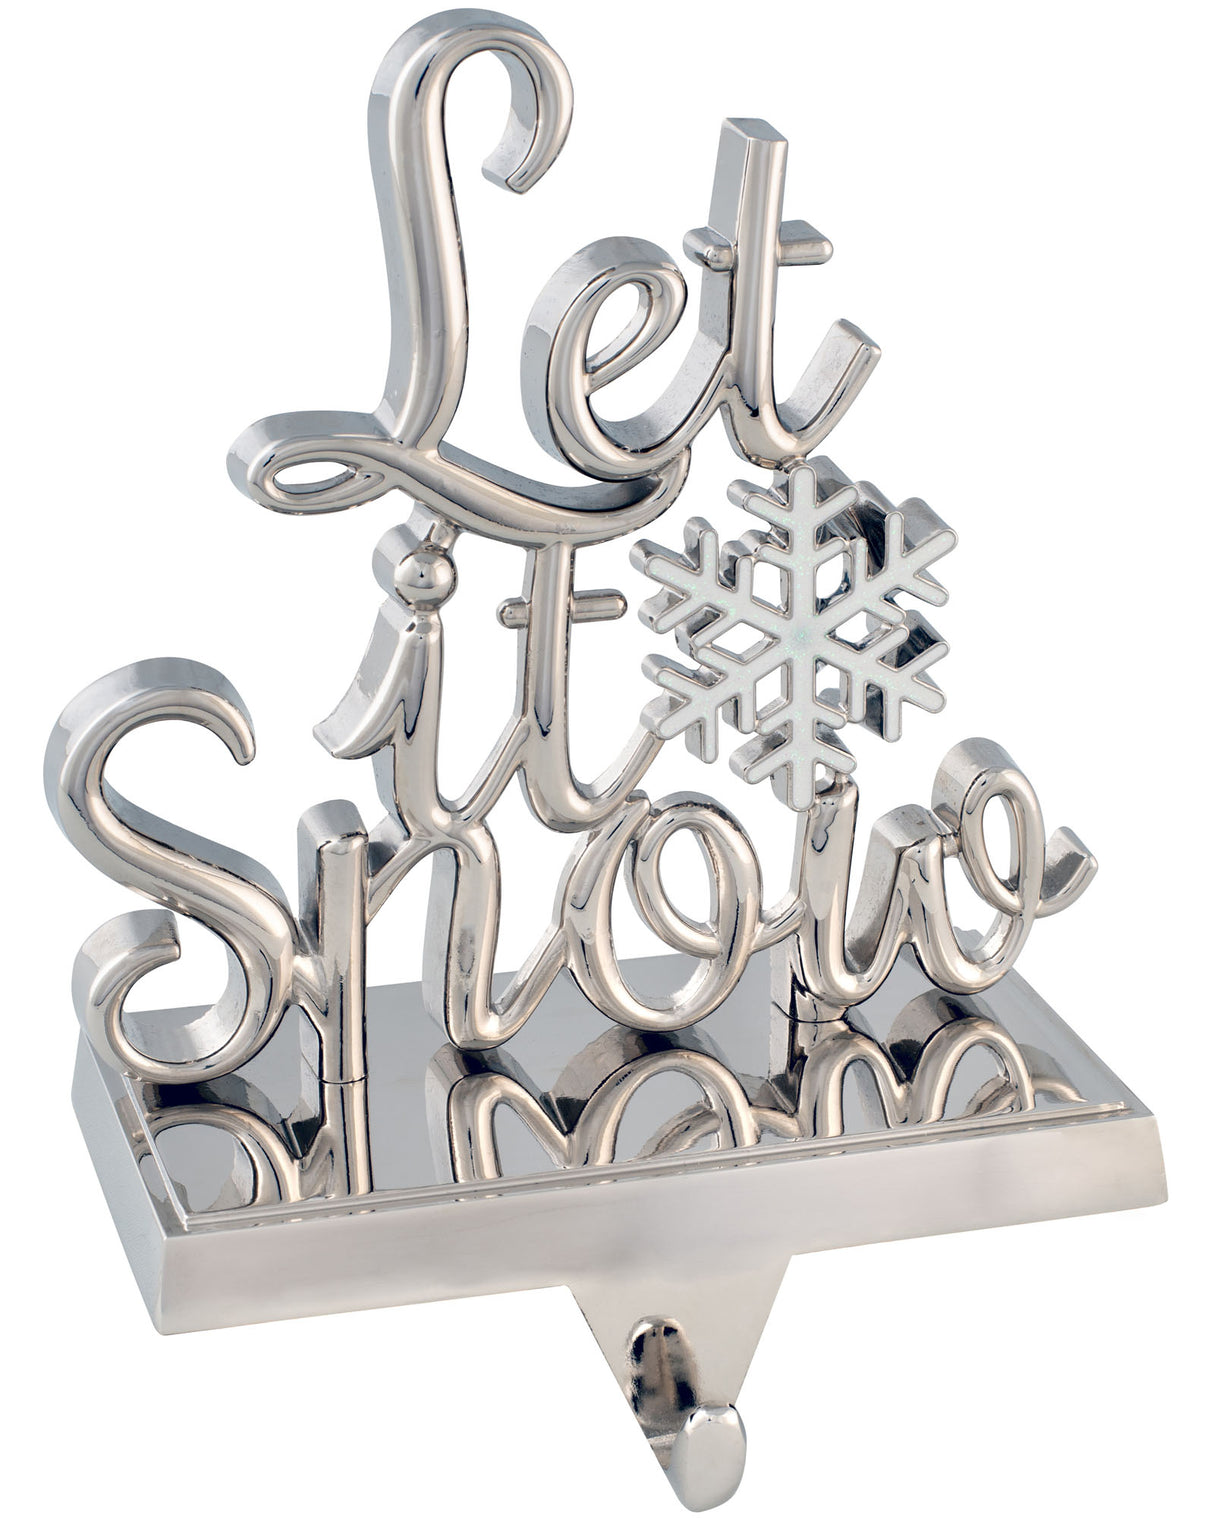 Let it Snow Christmas Stocking Holder, Silver, 17 cm